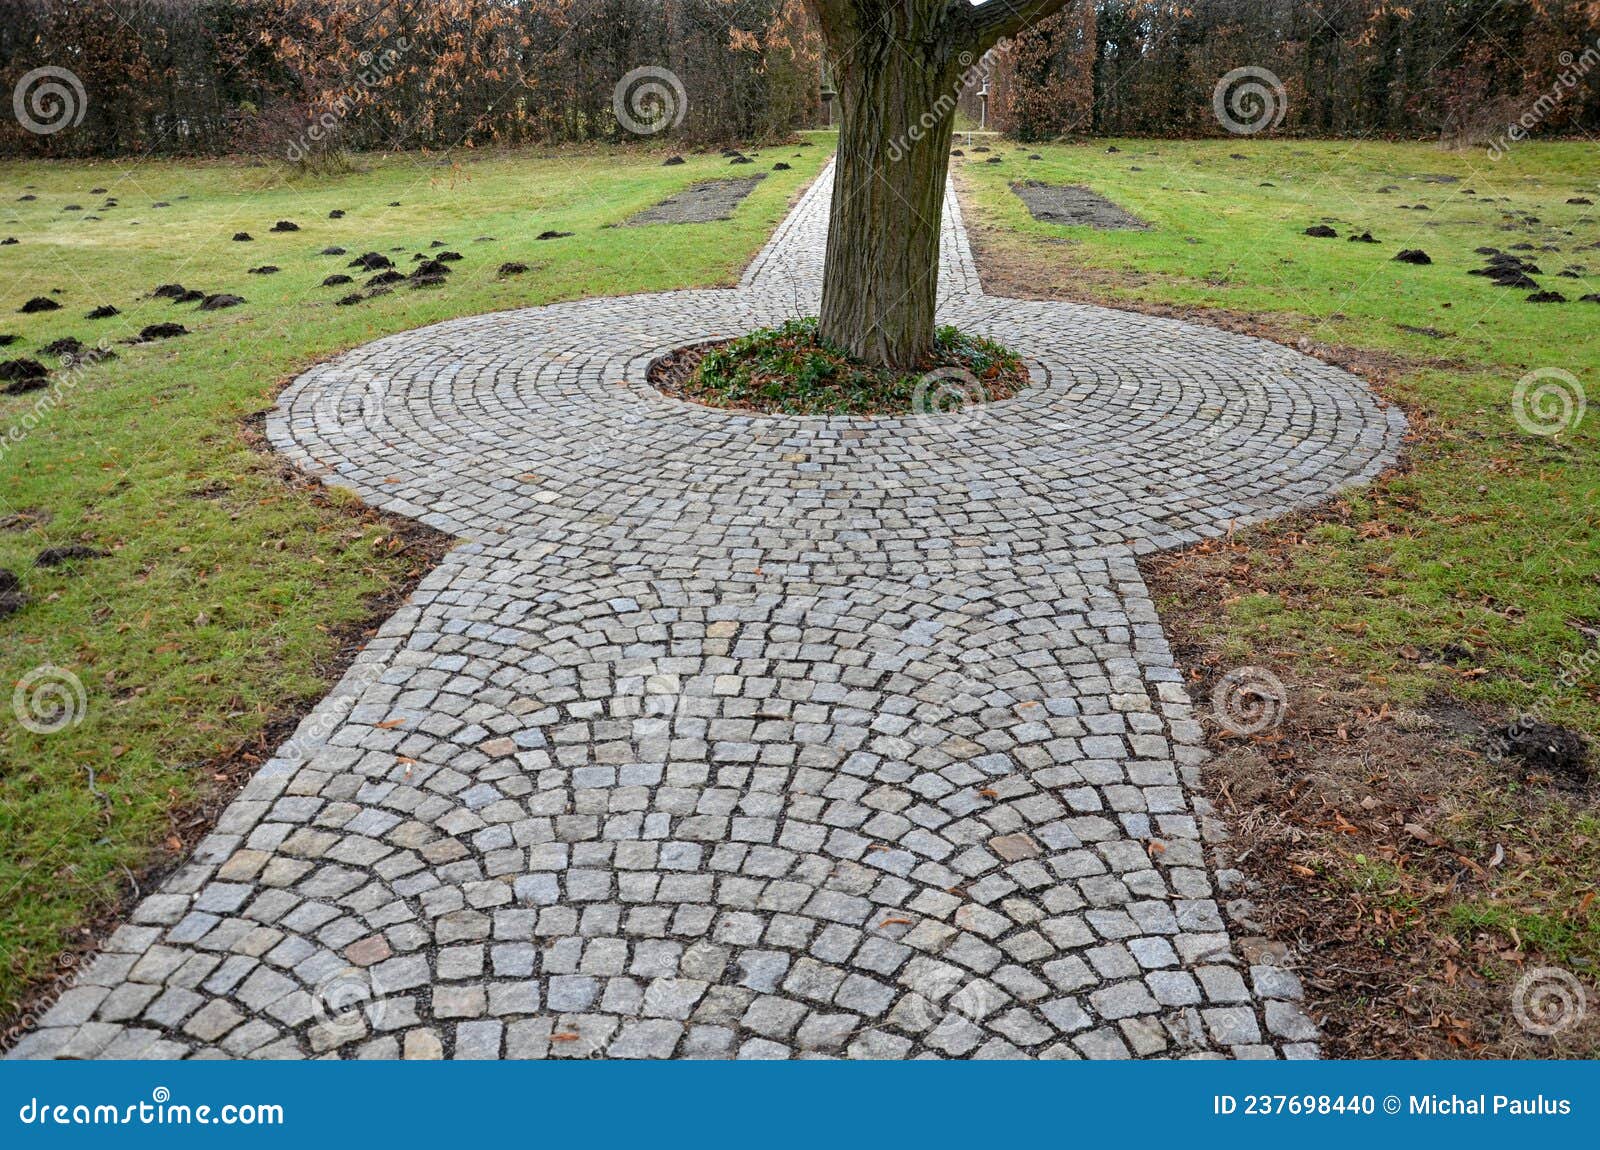 in the park there is a path surrounding a tree growing directly in the compositional axis of the historic garden. the cobblestones